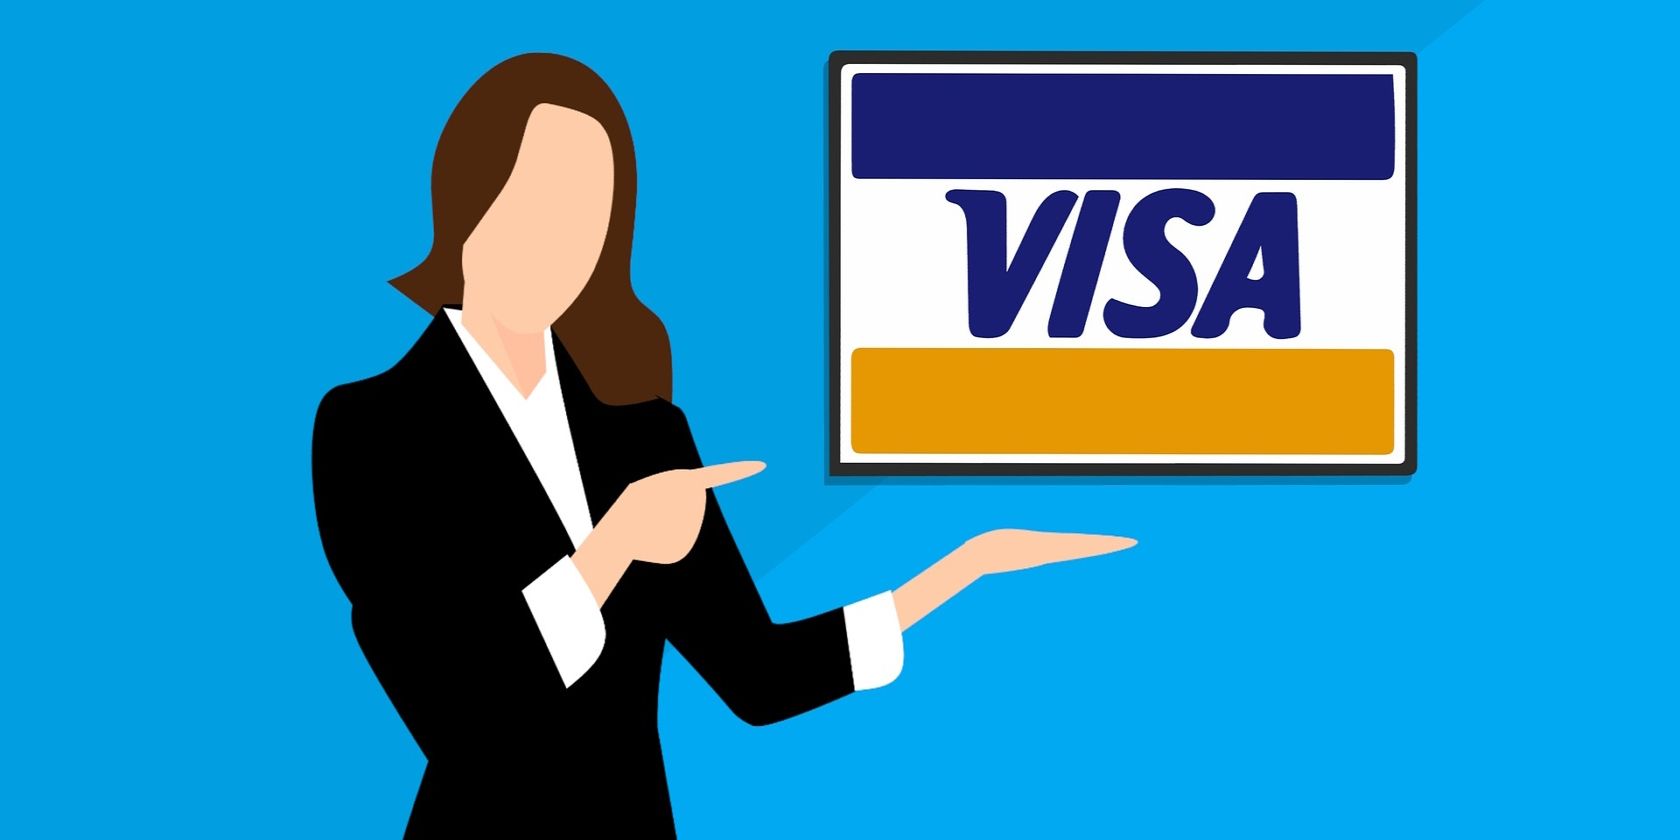 A drawing of a woman pointing to a visa logo